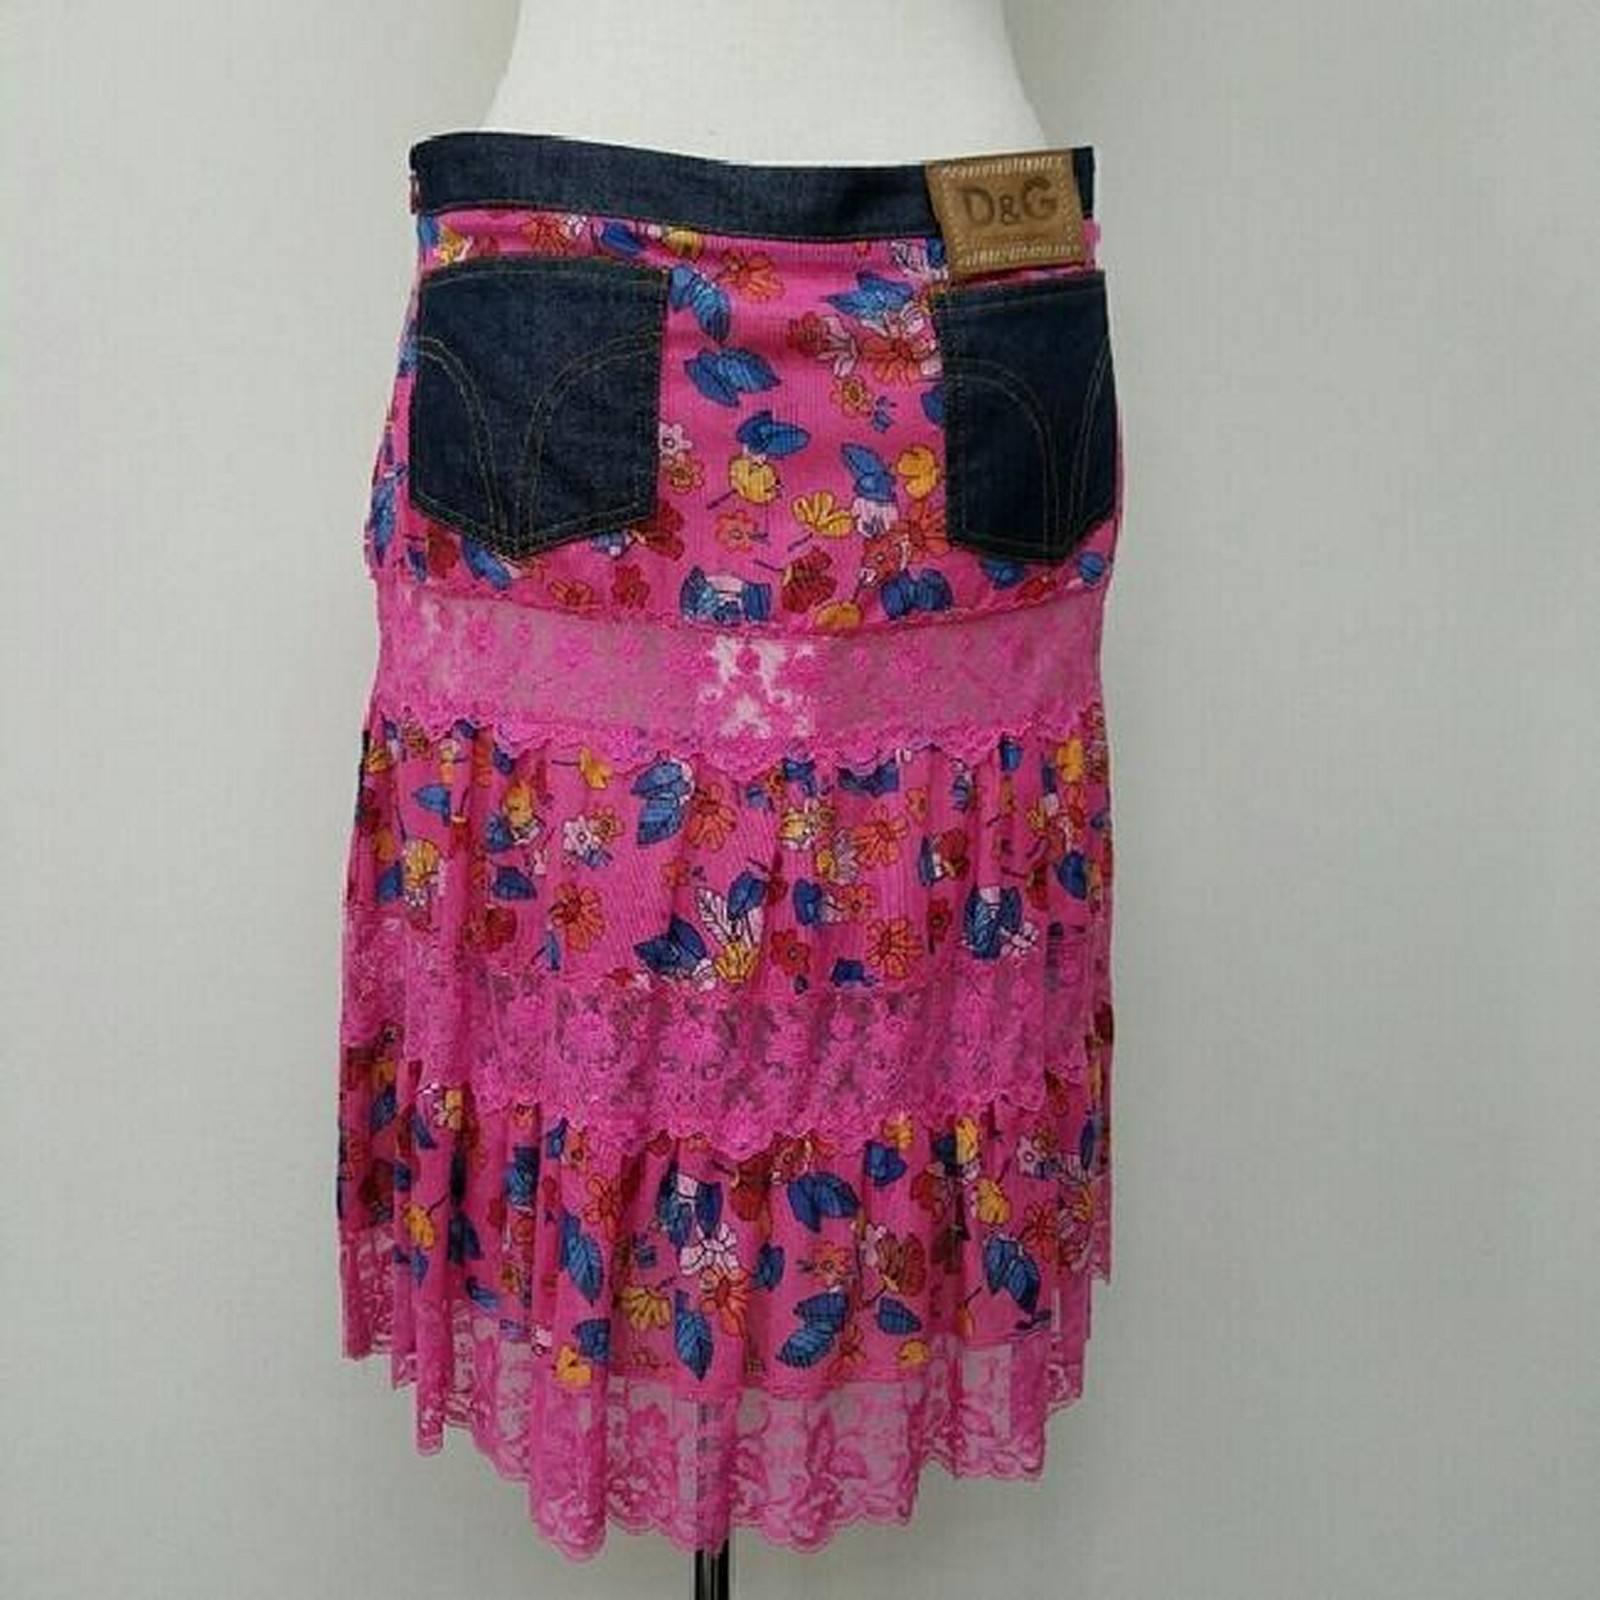 Dolce&Gabbana Lace Skirt

Flower skirt with denim pockets.Brand new. Never used. Tags still attached. MADE IN ITALY

Type:Skirts
Size:10 (M, 31)
Color:pink
Style/Collection:Dolce&Gabbana Lace Skirt